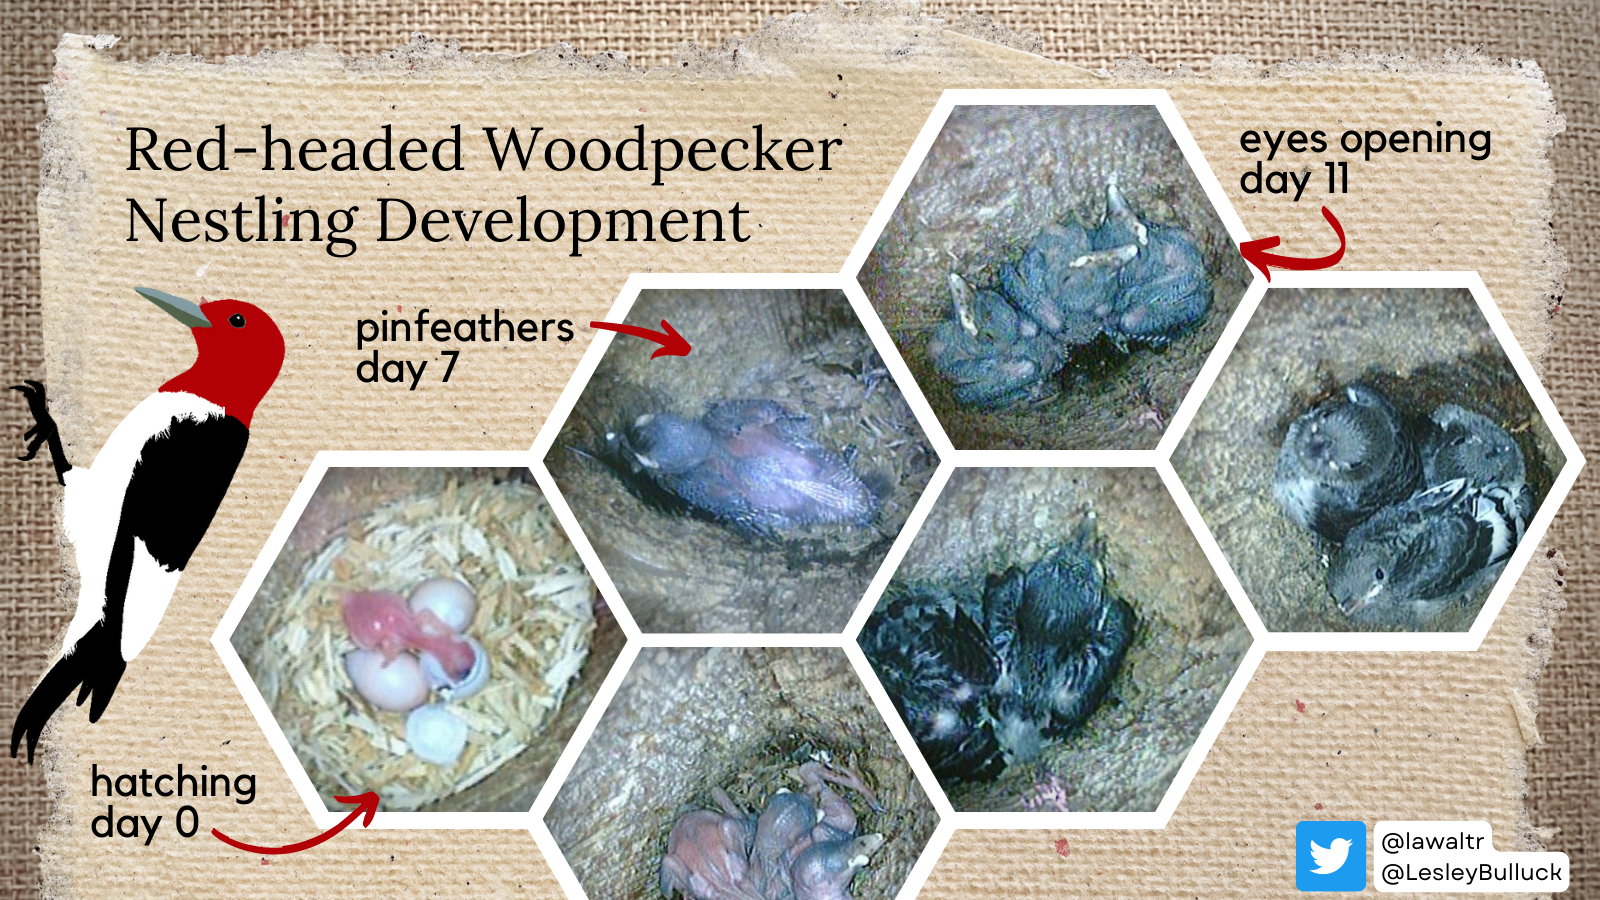 Red-headed Woodpeckers hatch asynchronously. Pinfeathers emerge at day 7 and eyes open on day 11.